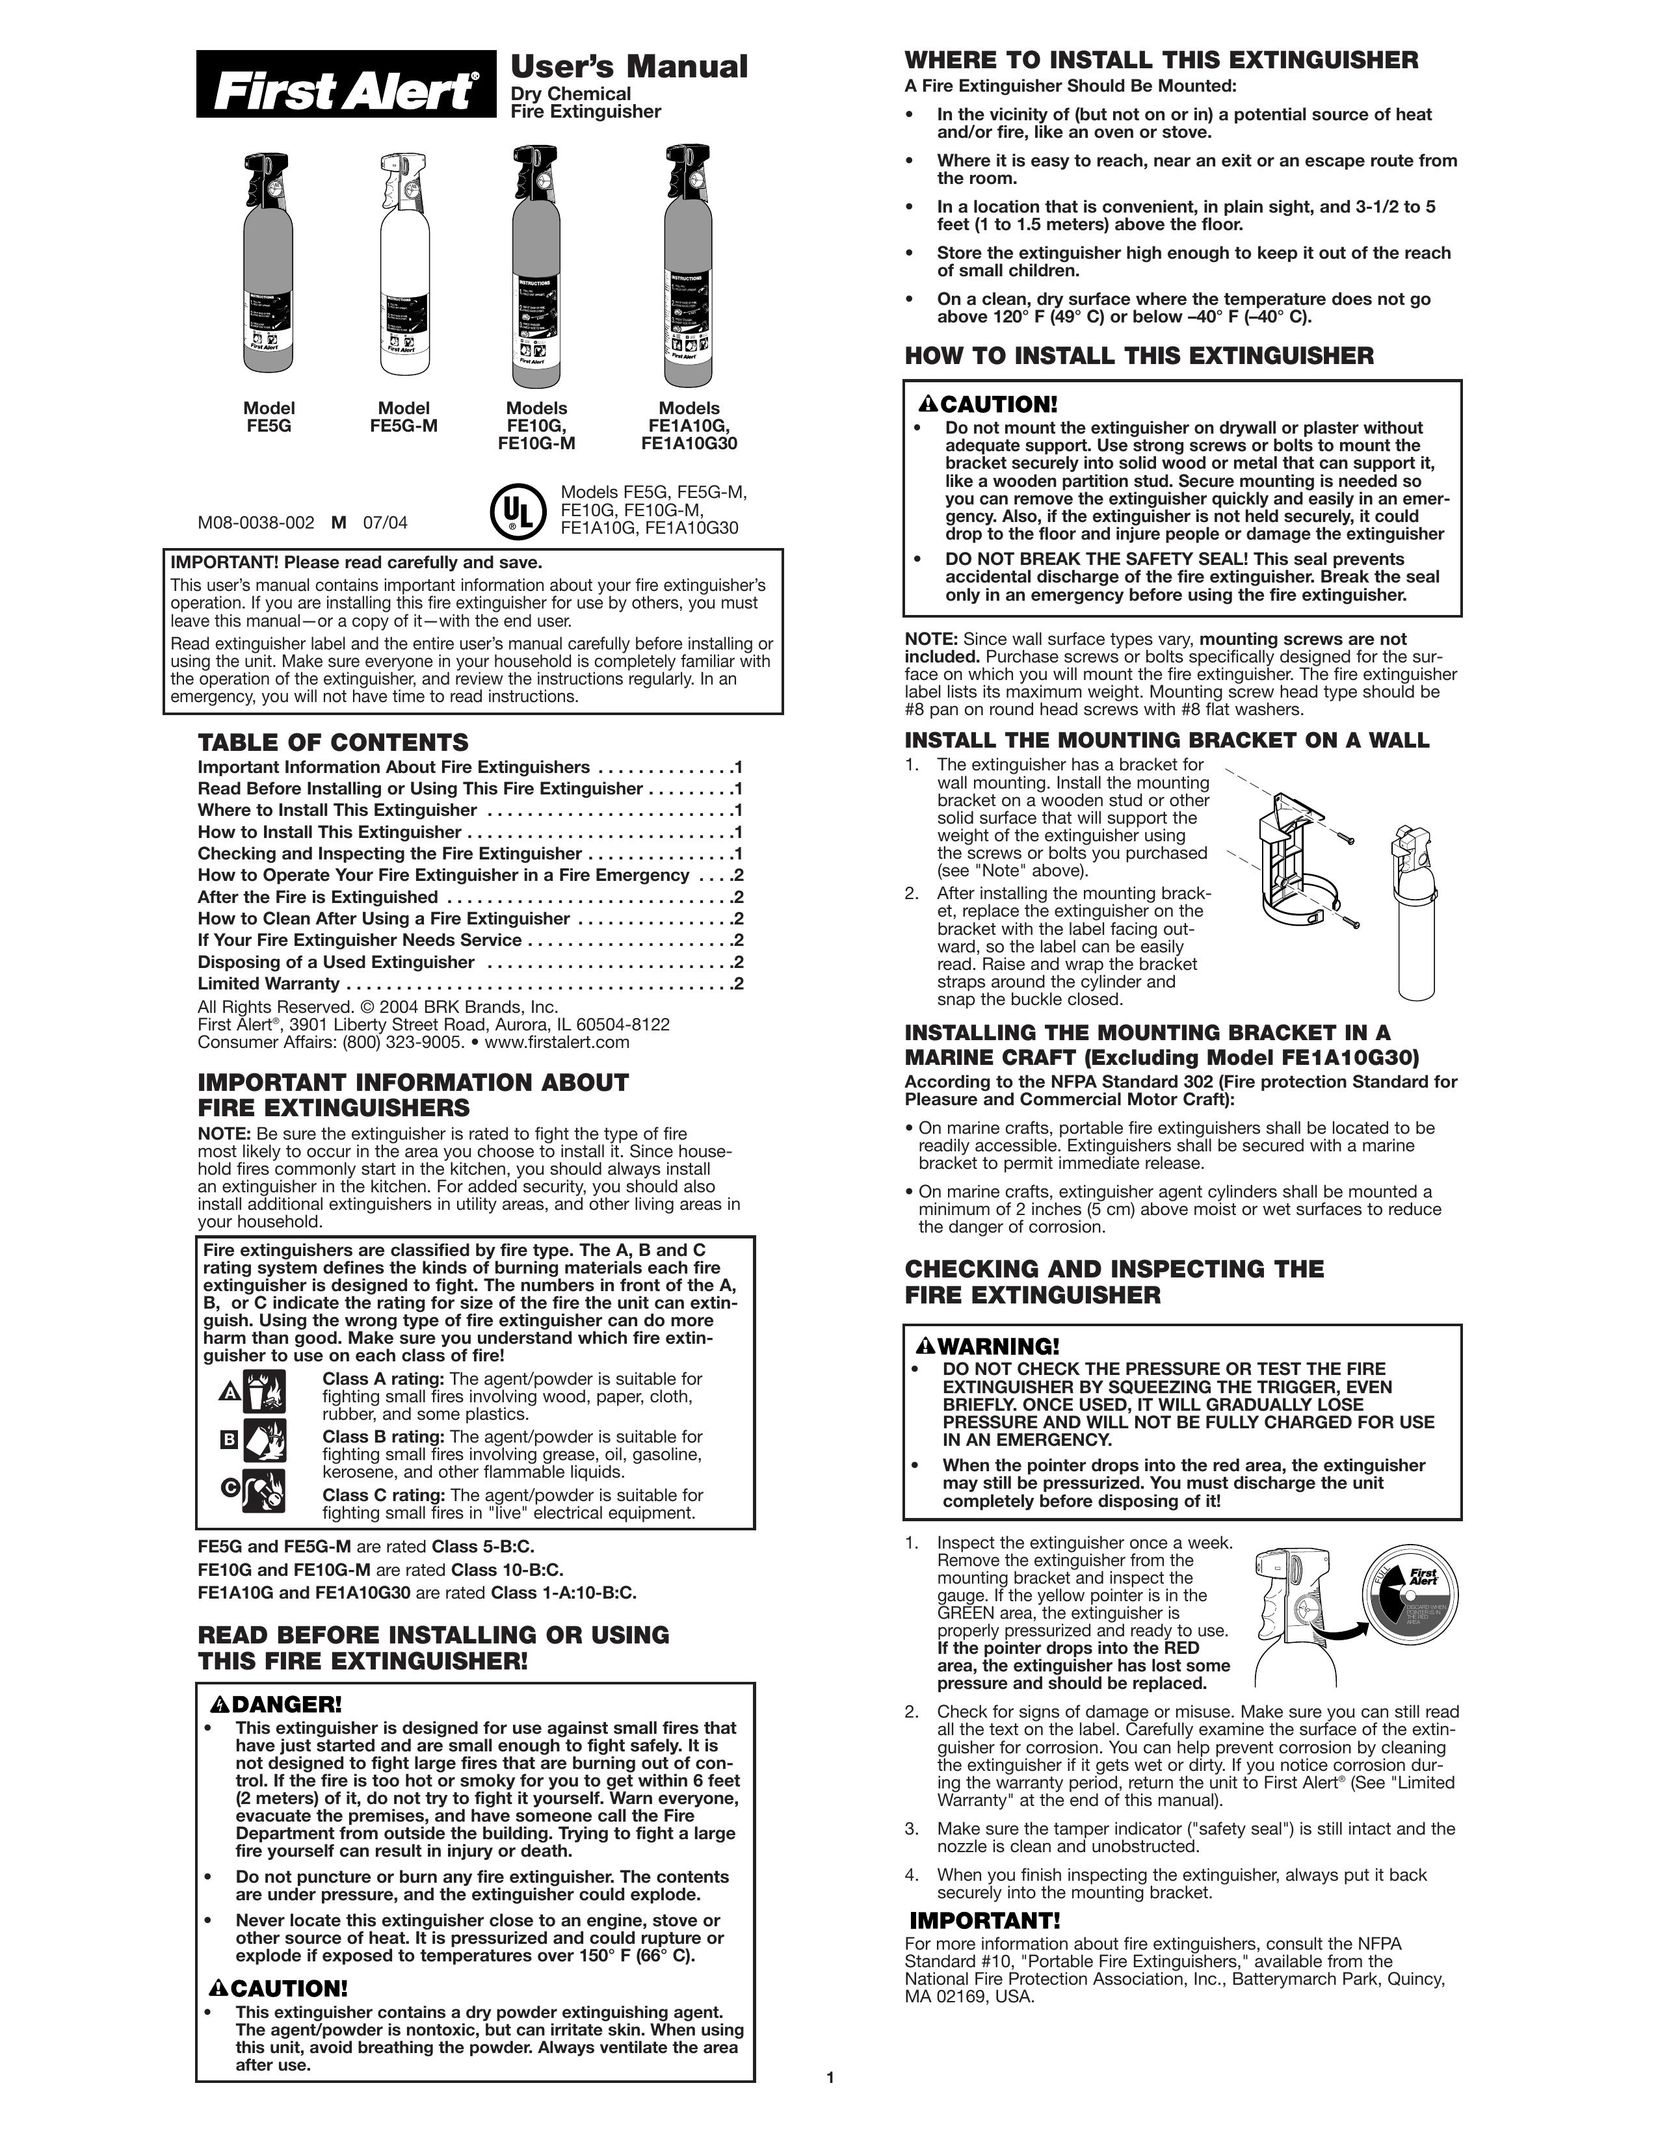 First Alert FE1A10G30 Fire Extinguisher User Manual